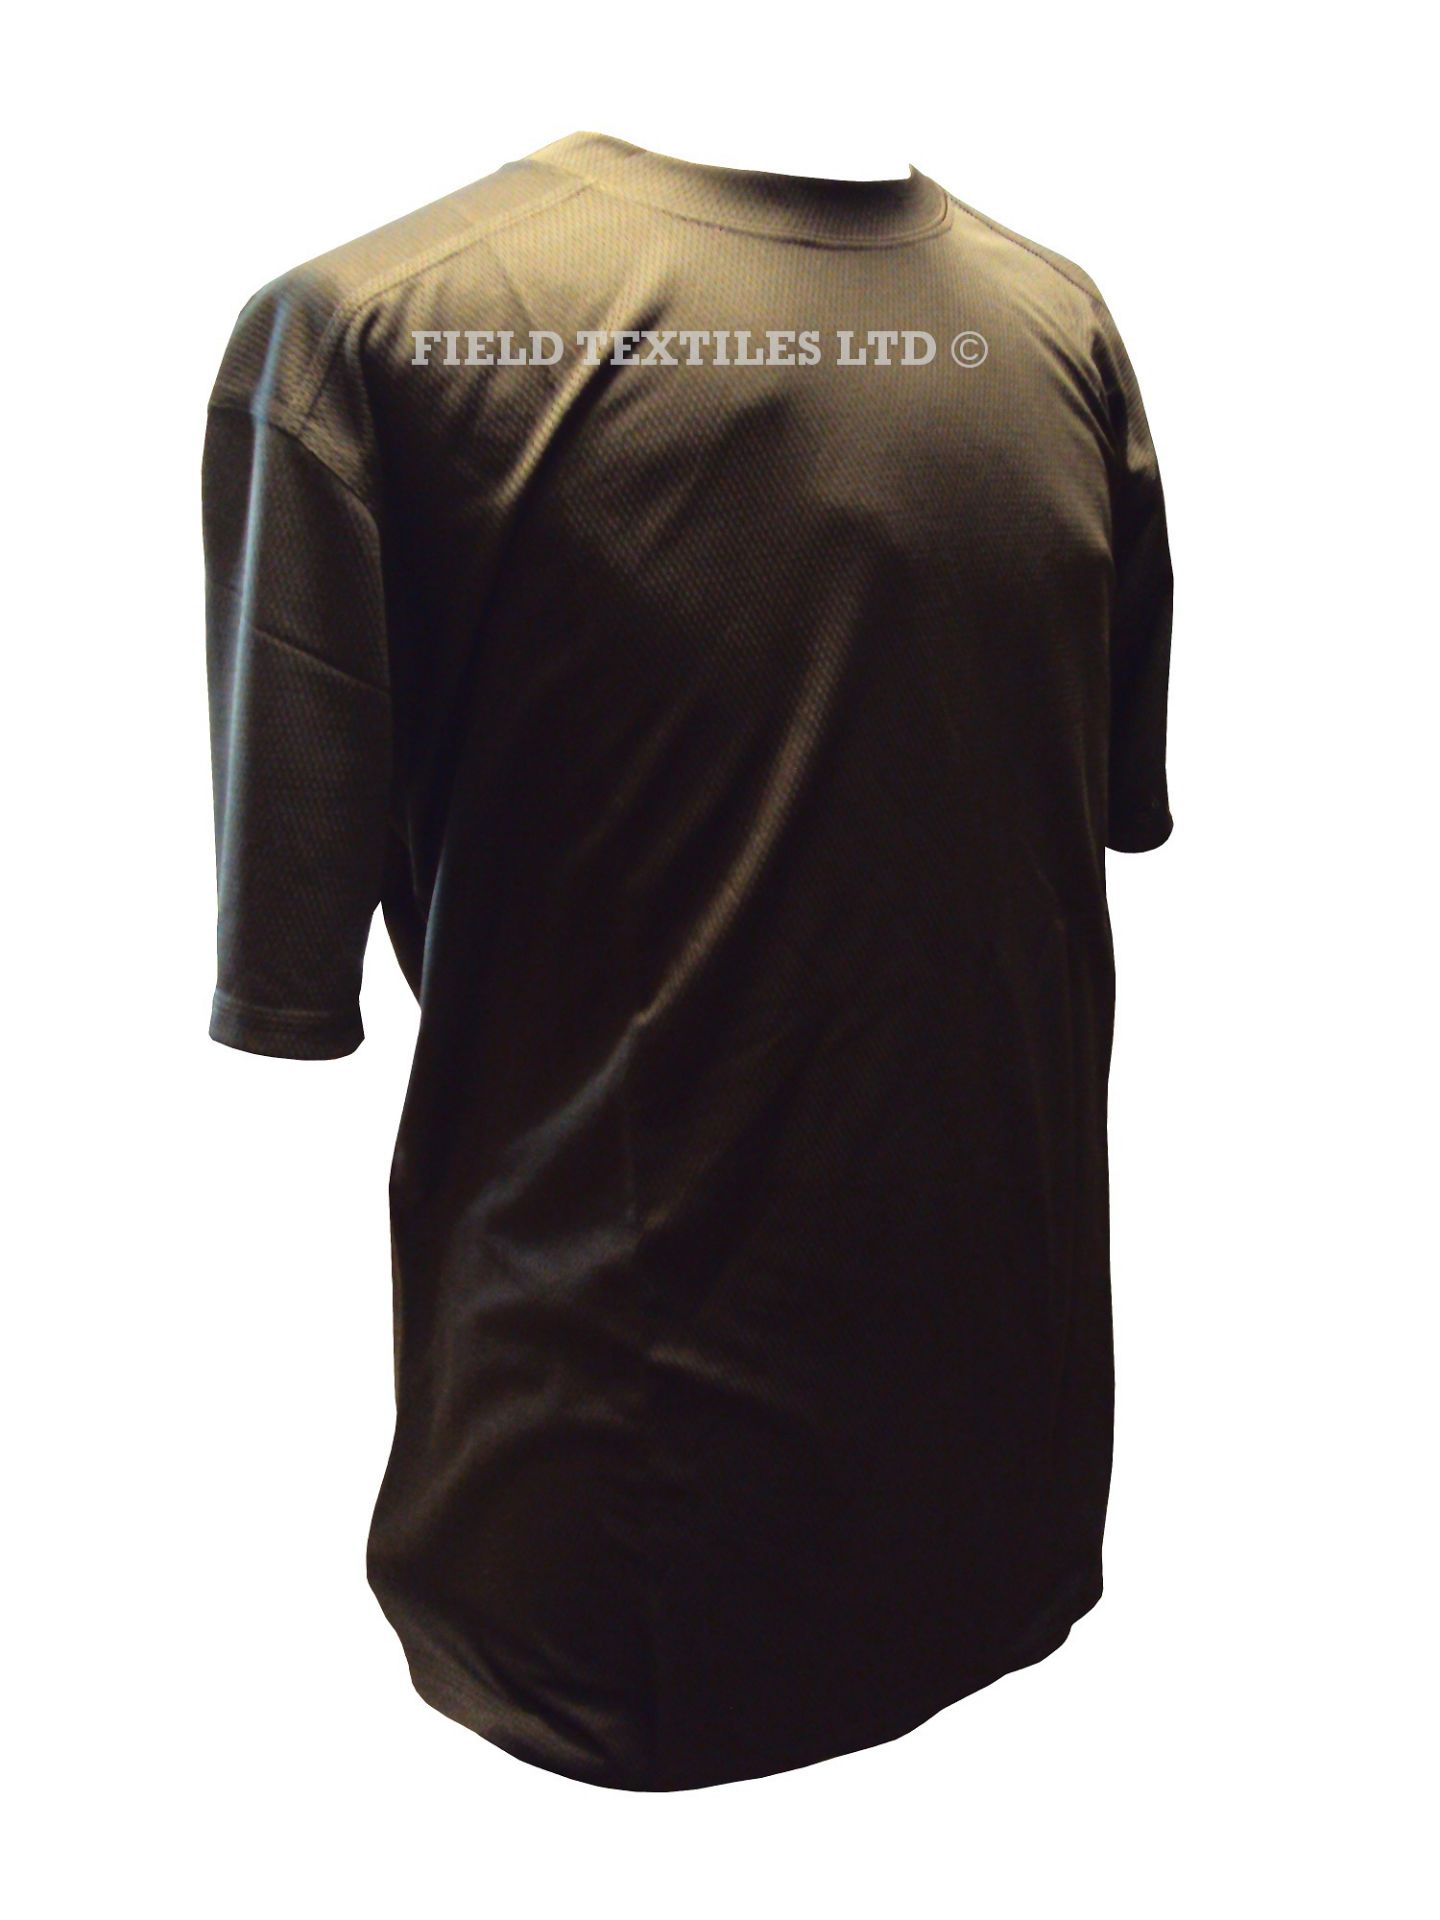 Pack of 20 - Brown Self-Wicking T-Shirts - Mix of Sizes - Grade 1